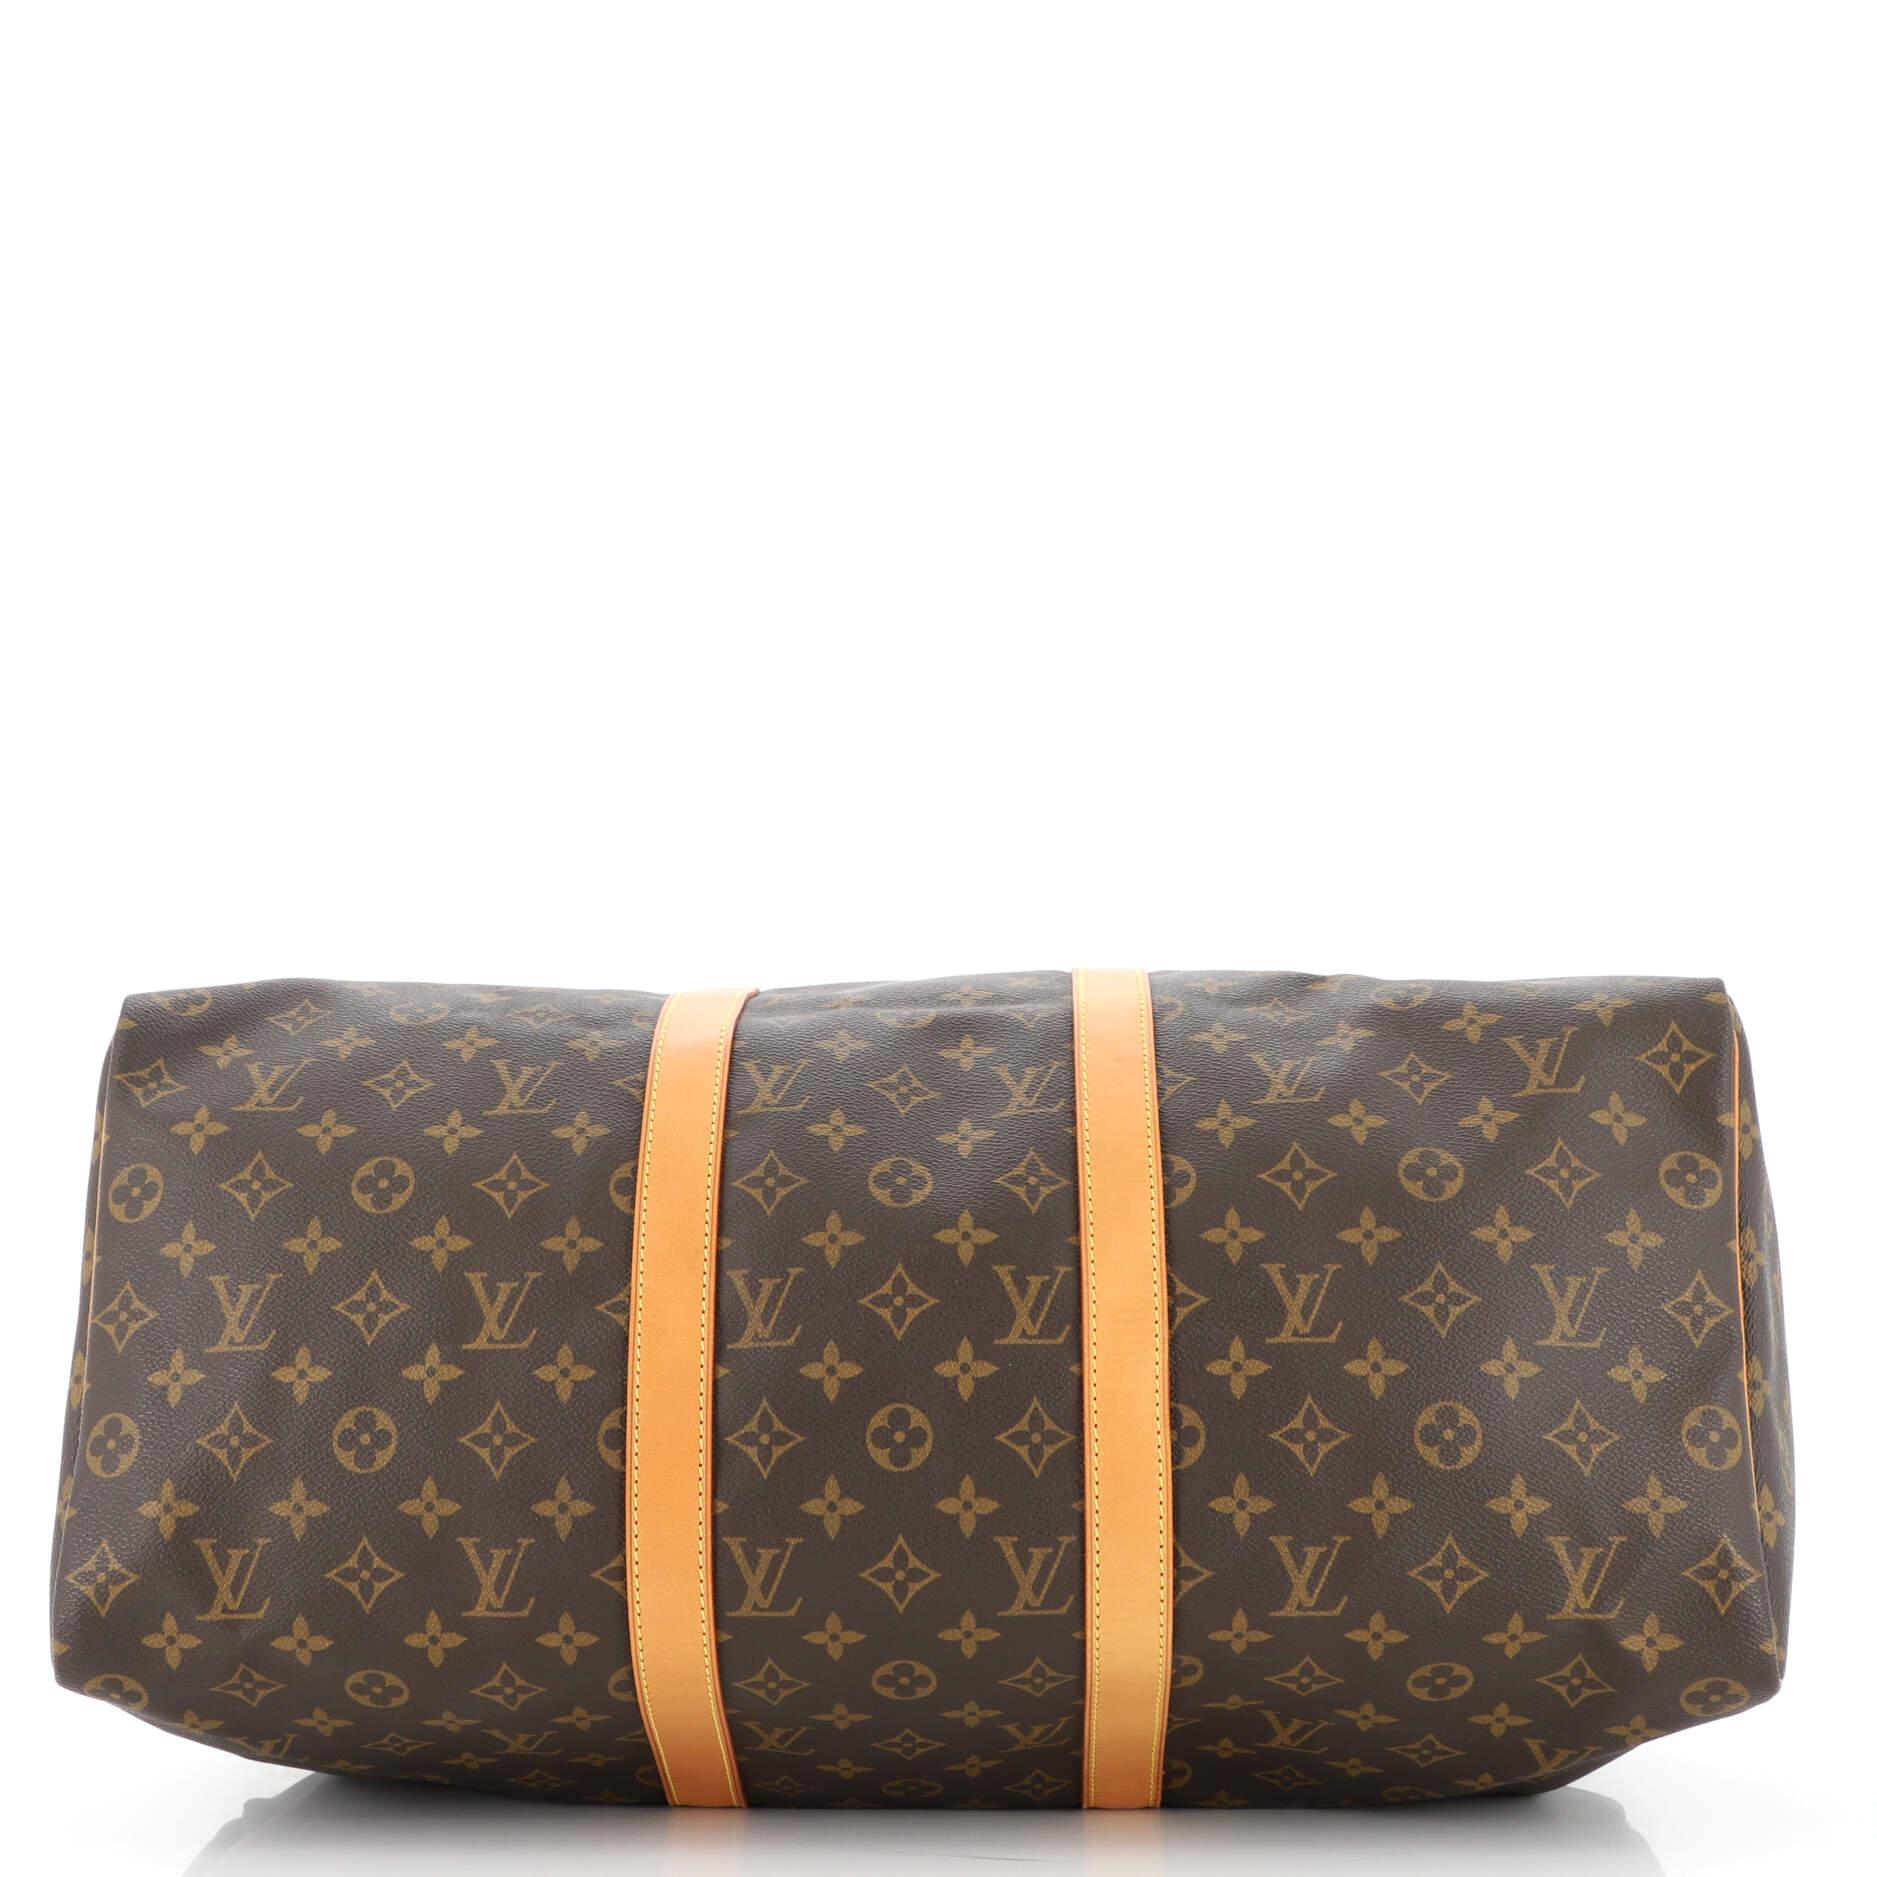 Louis Vuitton Keepall Bag Monogram Canvas 50 In Good Condition In NY, NY